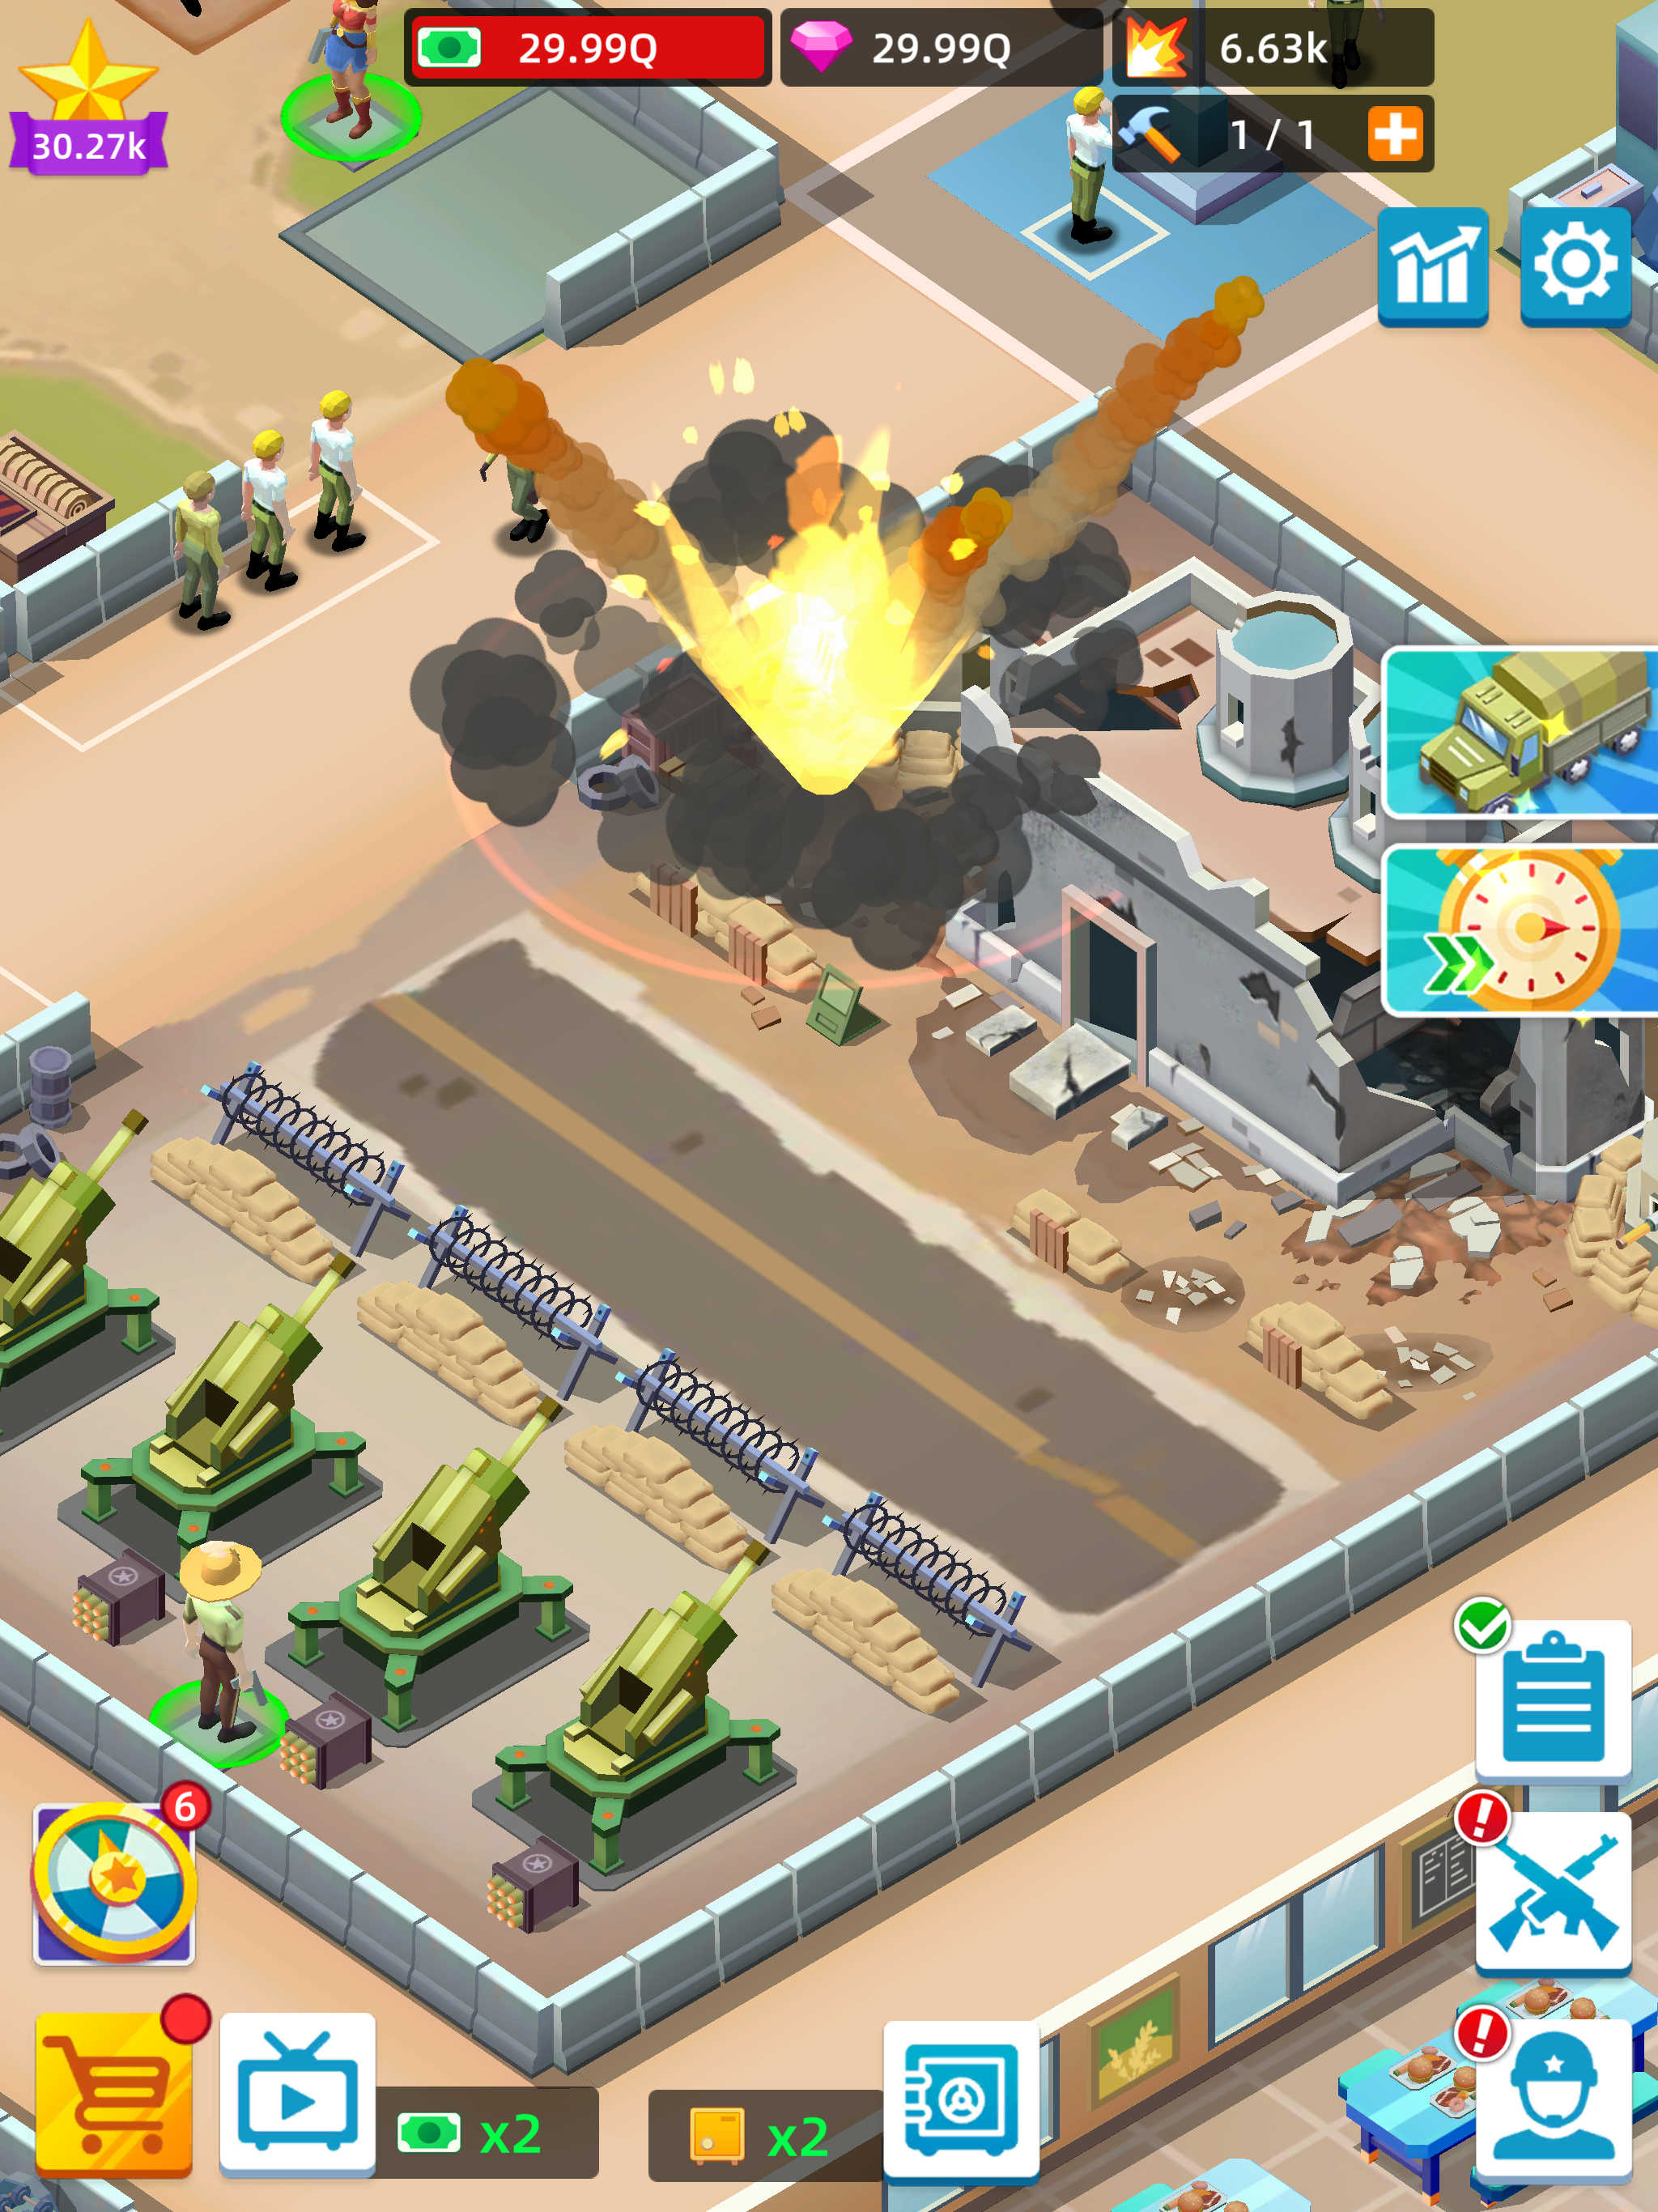 Download do APK de Army Tycoon 2 para Android